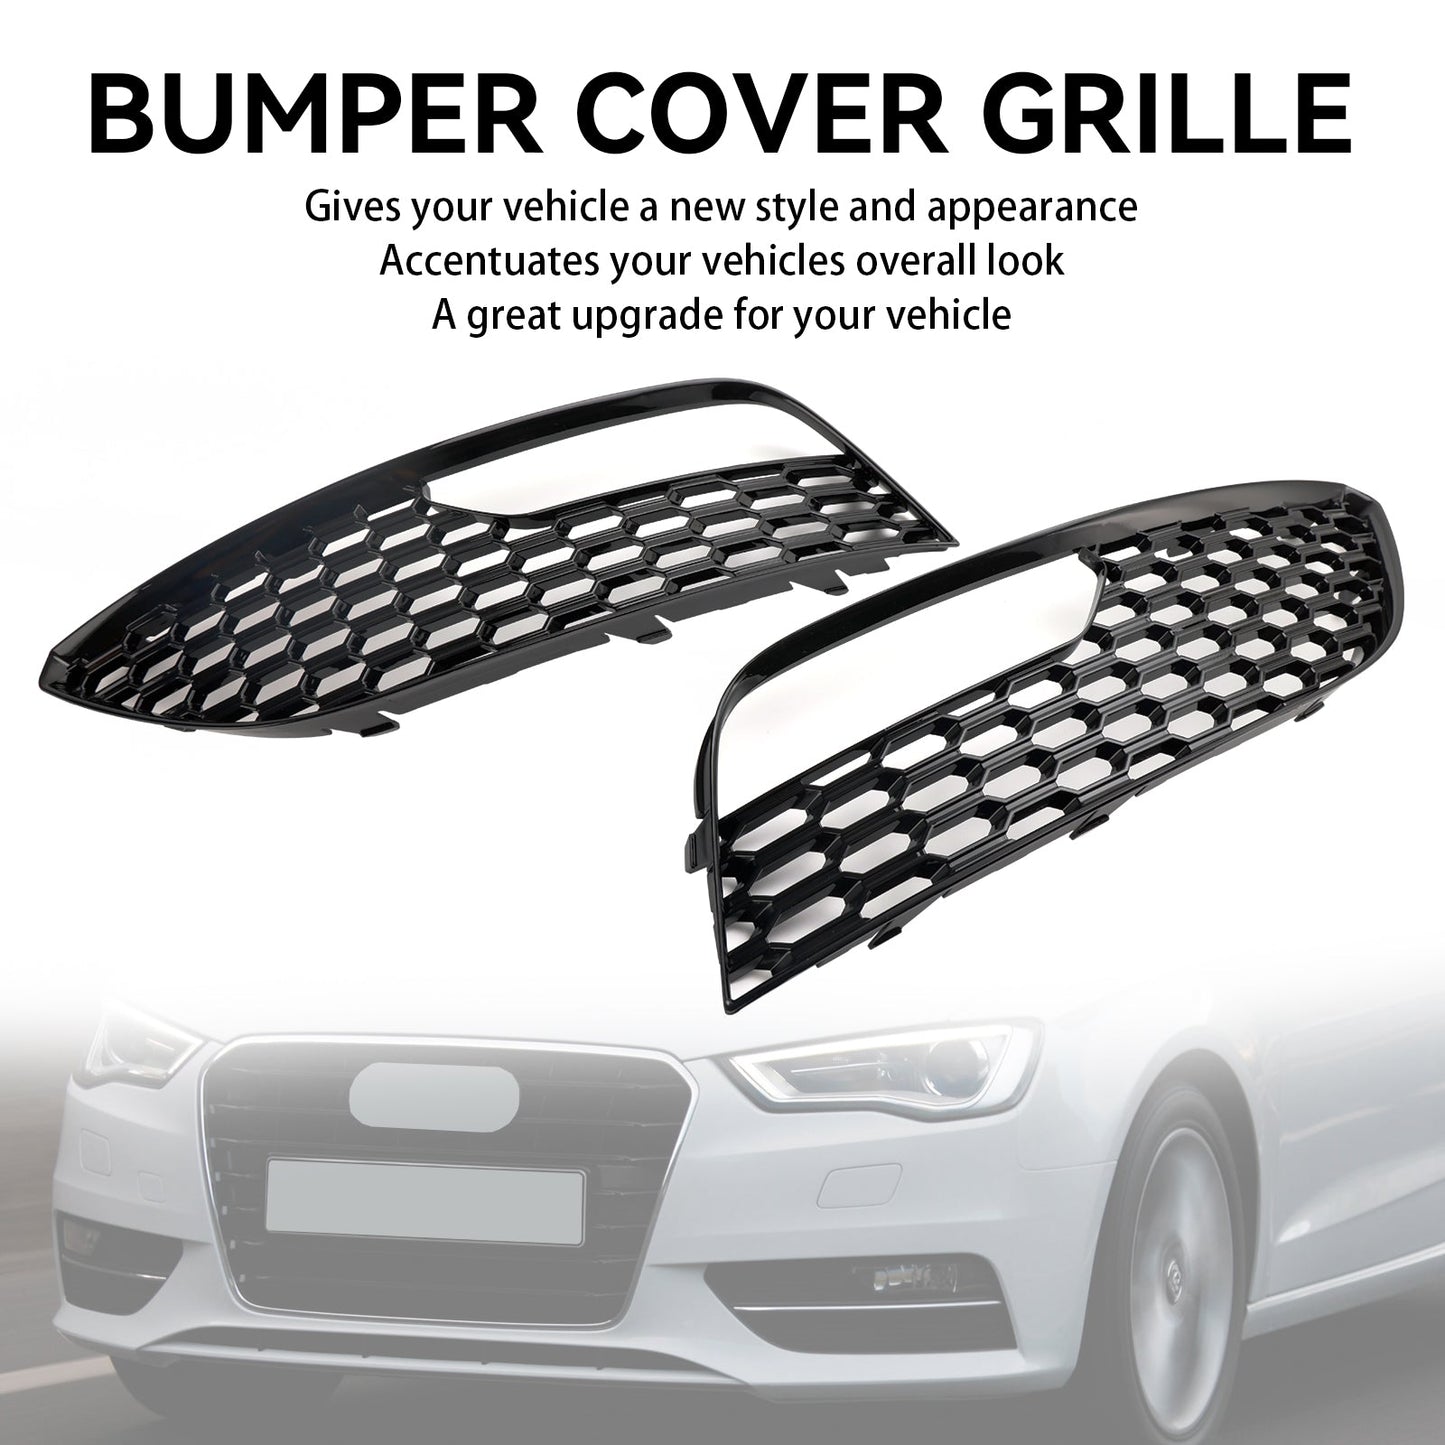 Audi A3 2012-2016 Mesh 2PCS Front Bumper Fog Light Surround Cover GrilleVehicle Parts &amp; Accessories, Car Tuning &amp; Styling, Body &amp; Exterior Styling!